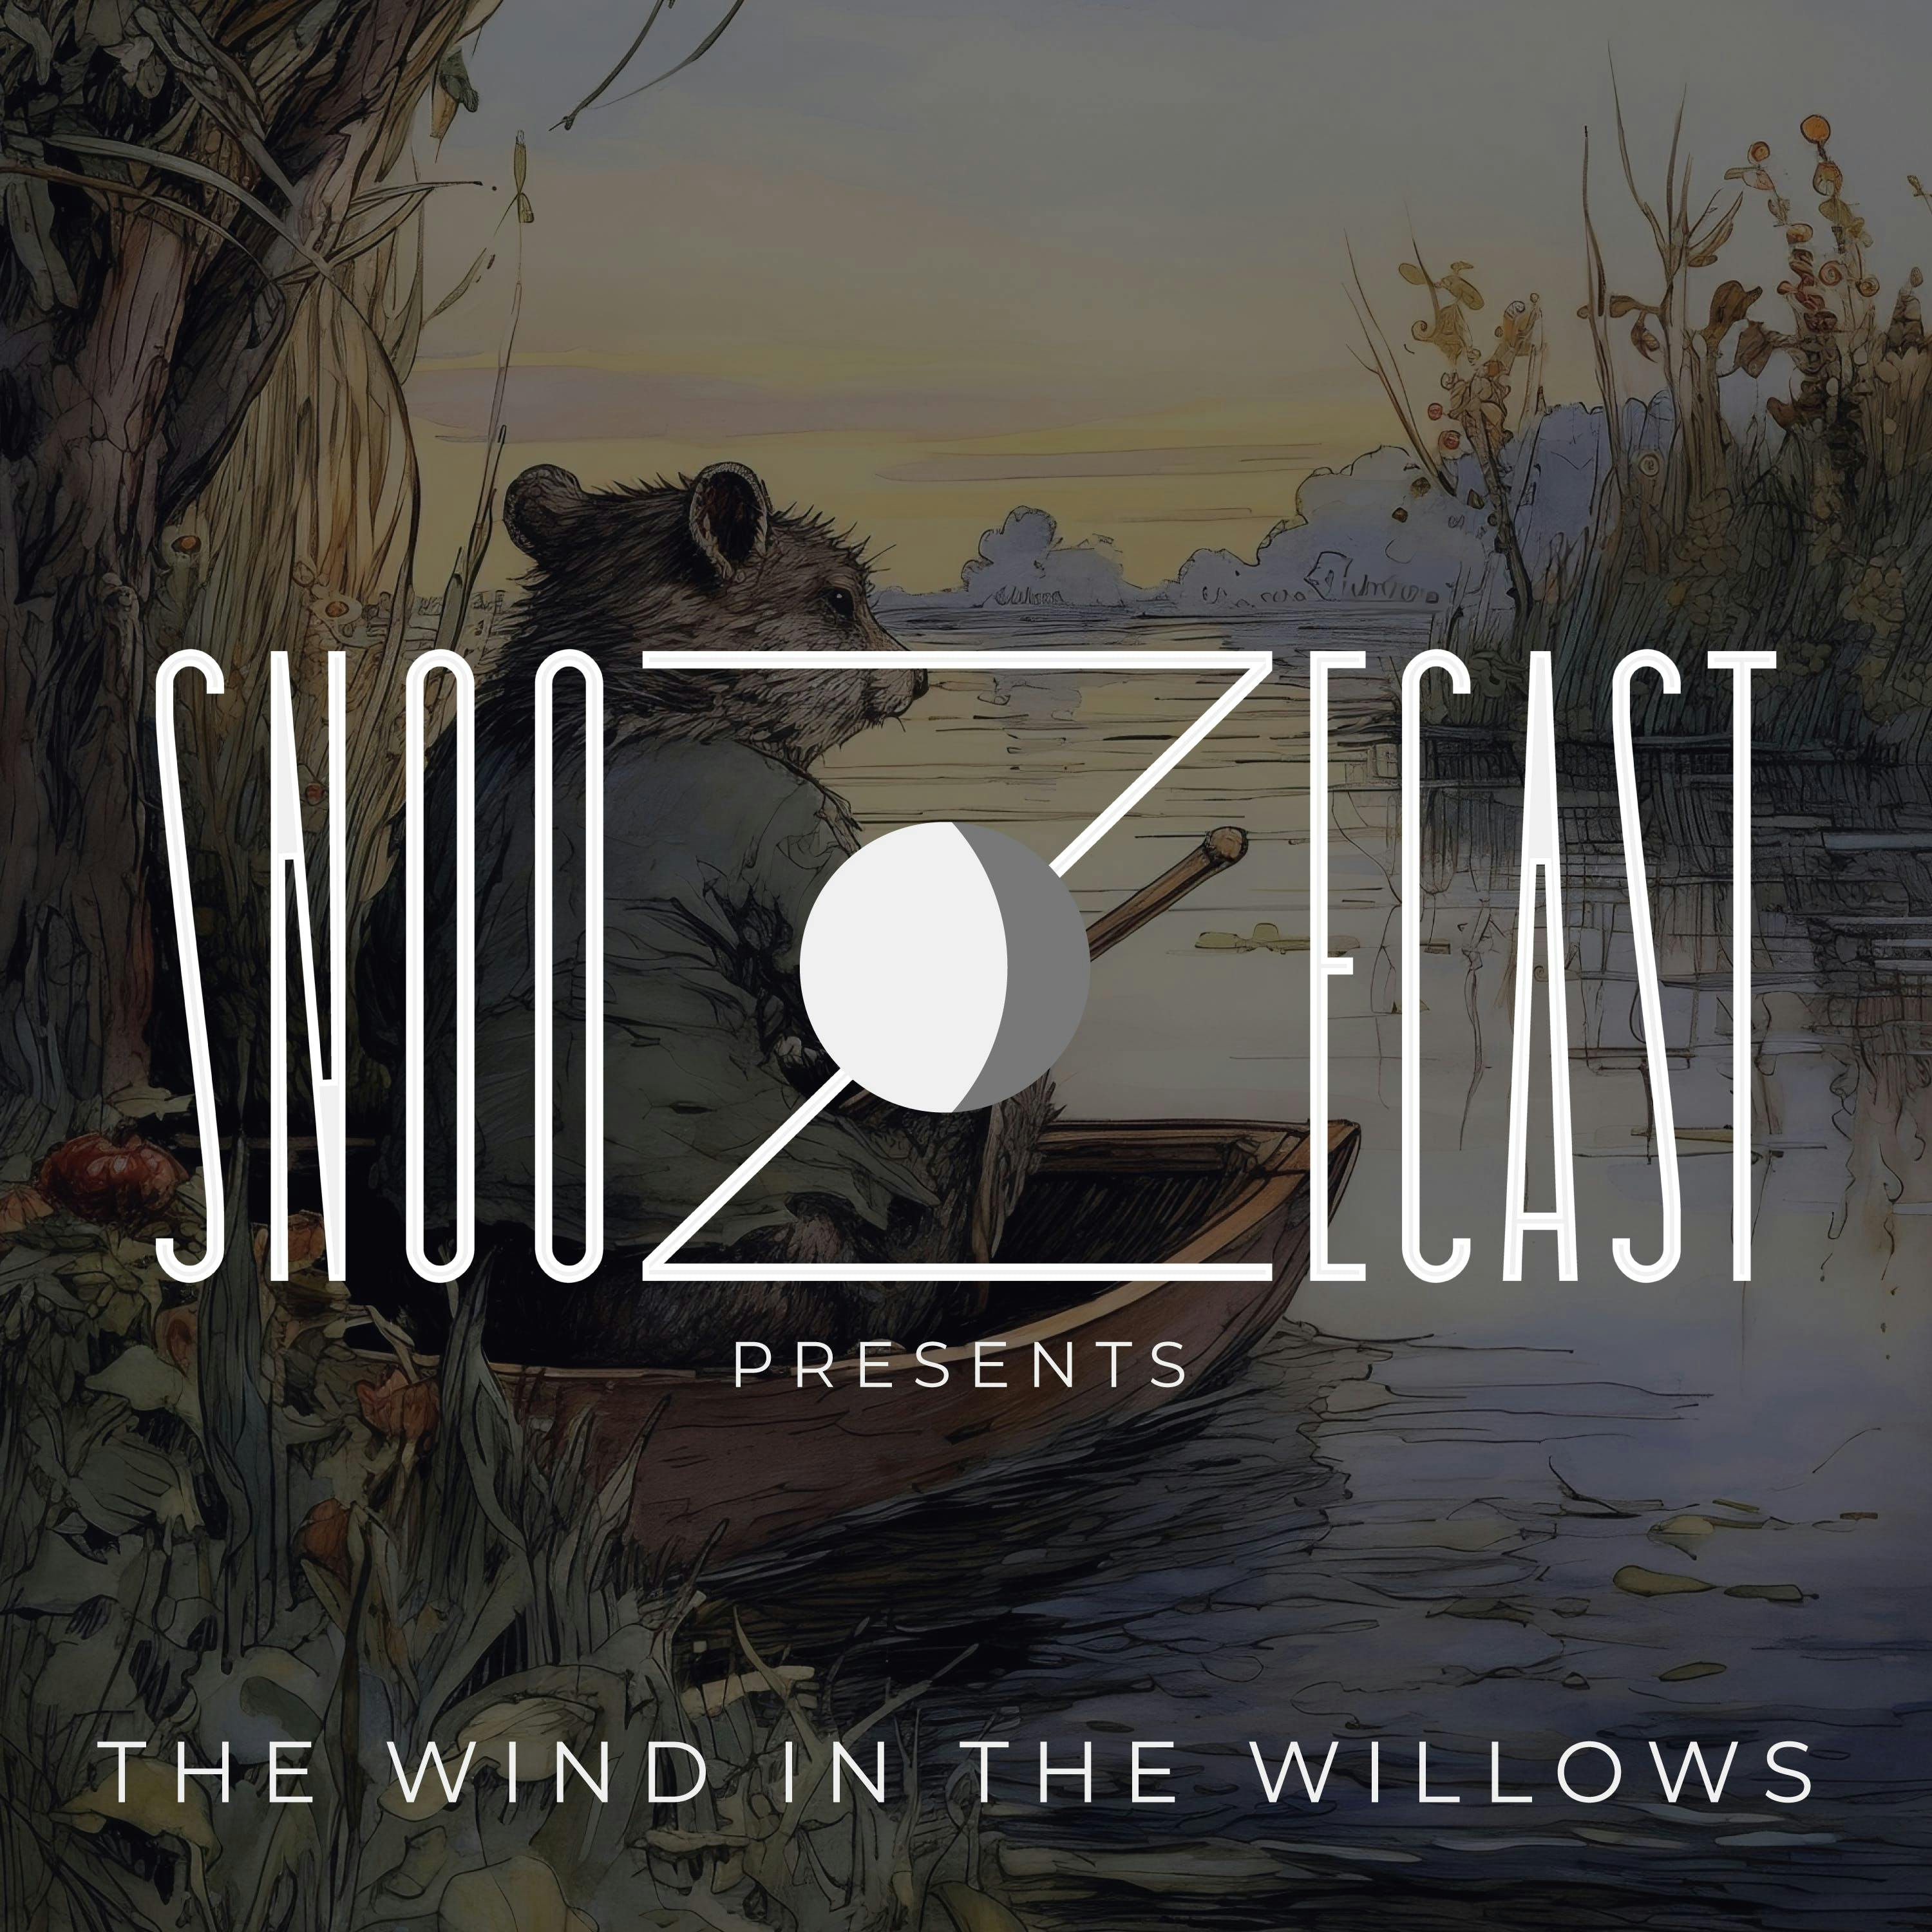 Snoozecast+ Deluxe: The Wind in the Willows podcast tile